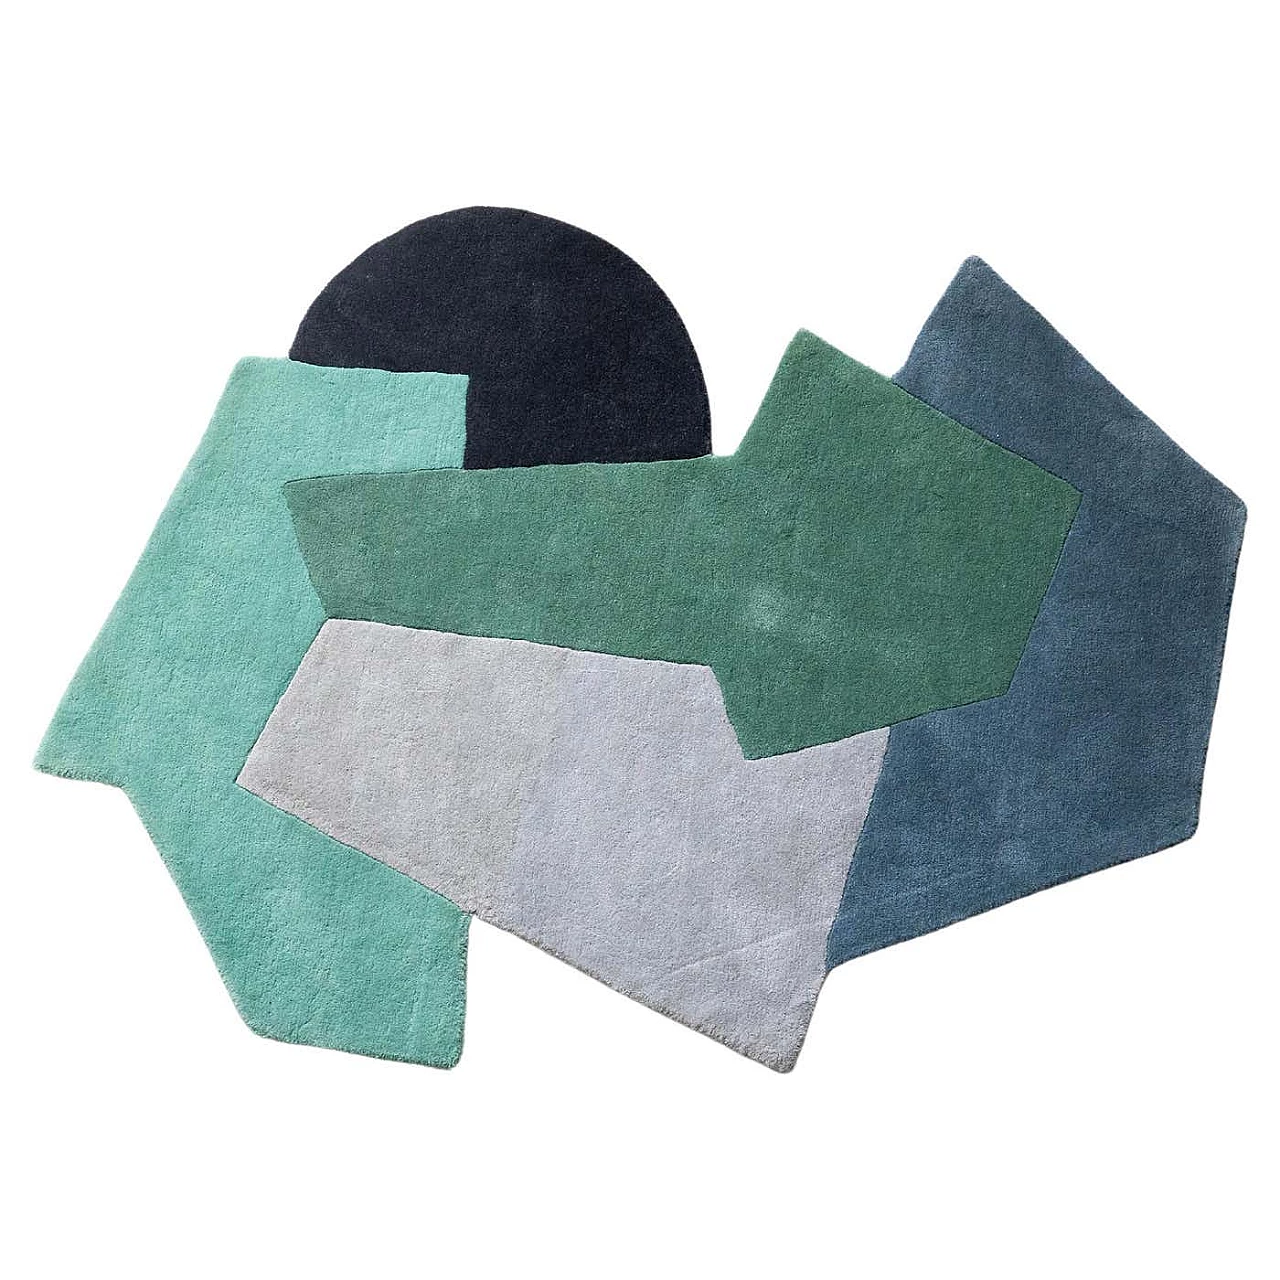 Multicolored wool geometric Abstraction rug, 2021 1